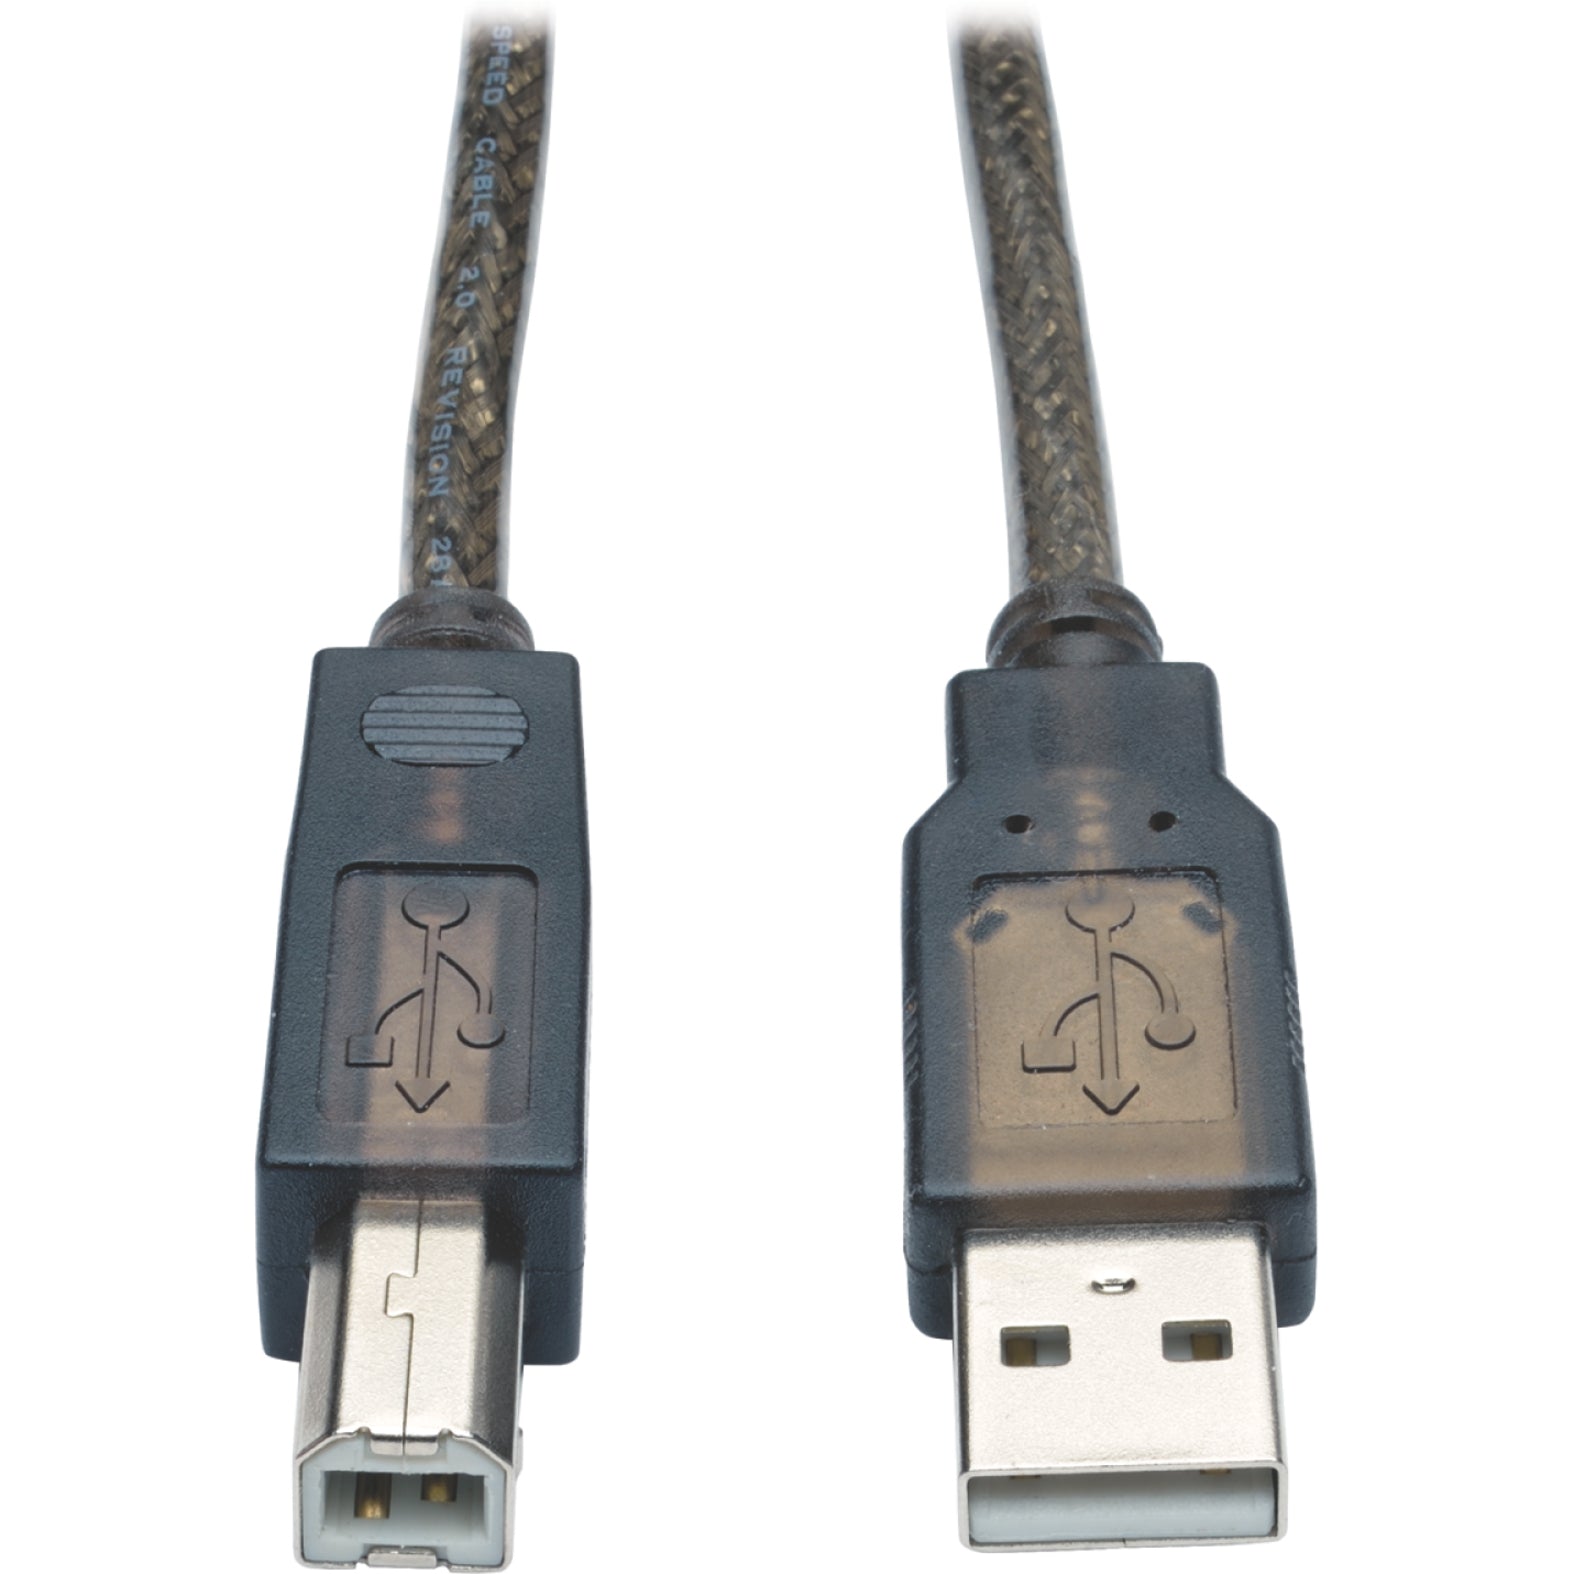 Tripp Lite U042-050 USB 2.0 Hi-Speed A/B Active Repeater Cable, 50 ft, Molded, Strain Relief, Silver